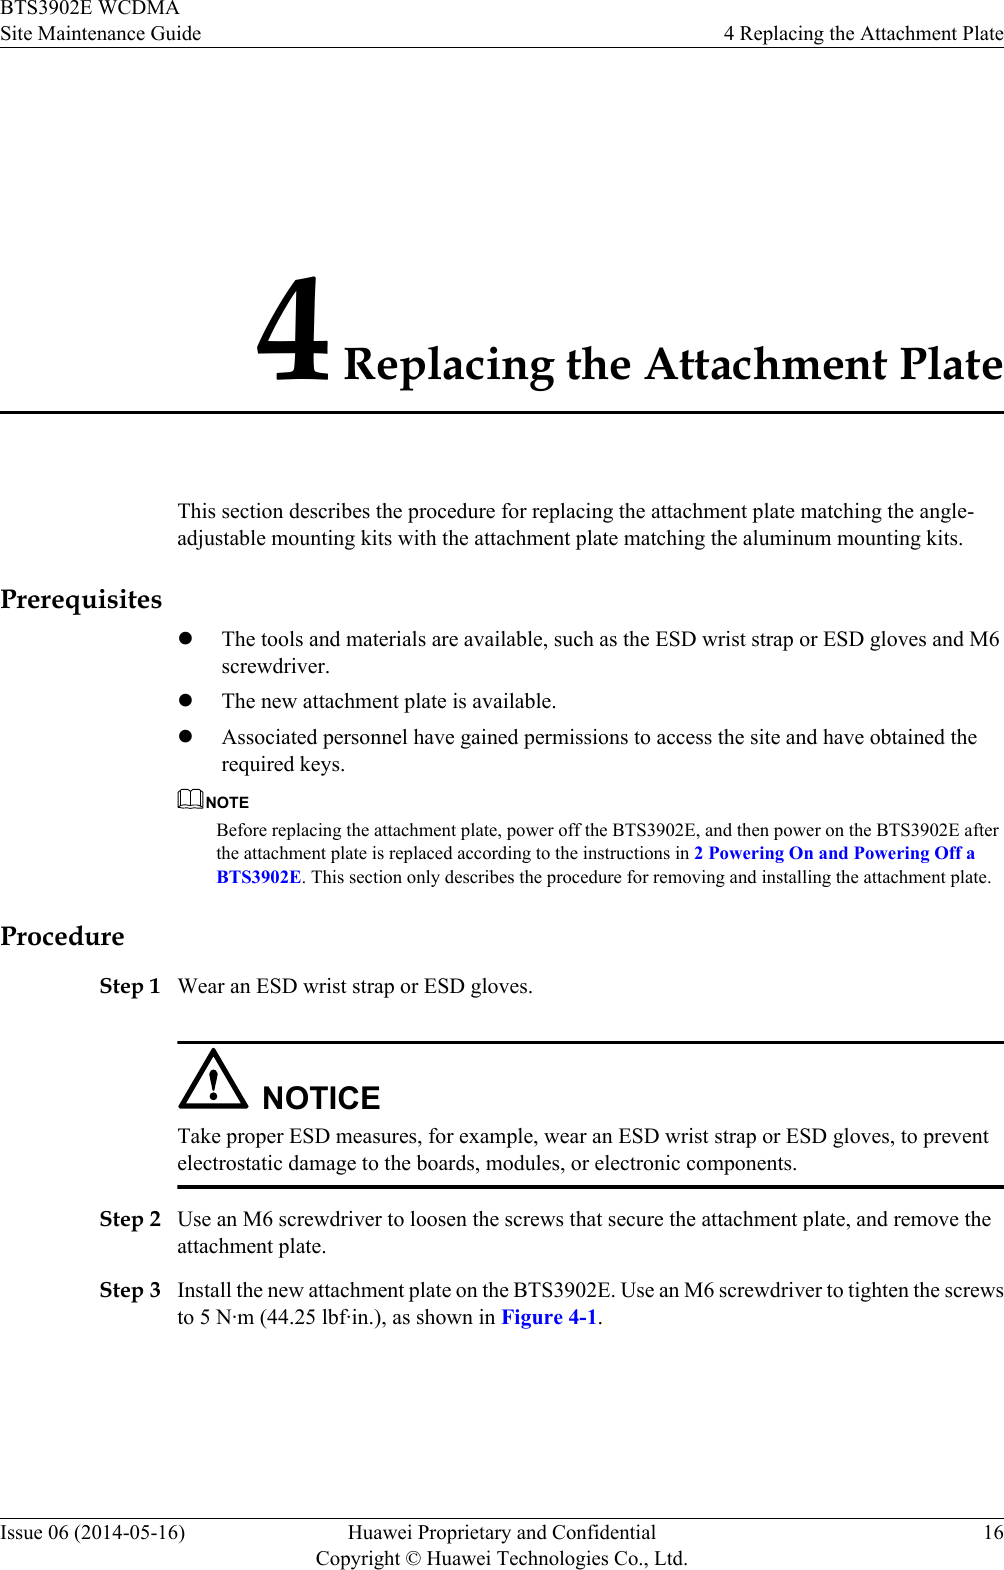 4 Replacing the Attachment PlateThis section describes the procedure for replacing the attachment plate matching the angle-adjustable mounting kits with the attachment plate matching the aluminum mounting kits.PrerequisiteslThe tools and materials are available, such as the ESD wrist strap or ESD gloves and M6screwdriver.lThe new attachment plate is available.lAssociated personnel have gained permissions to access the site and have obtained therequired keys.NOTEBefore replacing the attachment plate, power off the BTS3902E, and then power on the BTS3902E afterthe attachment plate is replaced according to the instructions in 2 Powering On and Powering Off aBTS3902E. This section only describes the procedure for removing and installing the attachment plate.ProcedureStep 1 Wear an ESD wrist strap or ESD gloves.NOTICETake proper ESD measures, for example, wear an ESD wrist strap or ESD gloves, to preventelectrostatic damage to the boards, modules, or electronic components.Step 2 Use an M6 screwdriver to loosen the screws that secure the attachment plate, and remove theattachment plate.Step 3 Install the new attachment plate on the BTS3902E. Use an M6 screwdriver to tighten the screwsto 5 N·m (44.25 lbf·in.), as shown in Figure 4-1.BTS3902E WCDMASite Maintenance Guide 4 Replacing the Attachment PlateIssue 06 (2014-05-16) Huawei Proprietary and ConfidentialCopyright © Huawei Technologies Co., Ltd.16